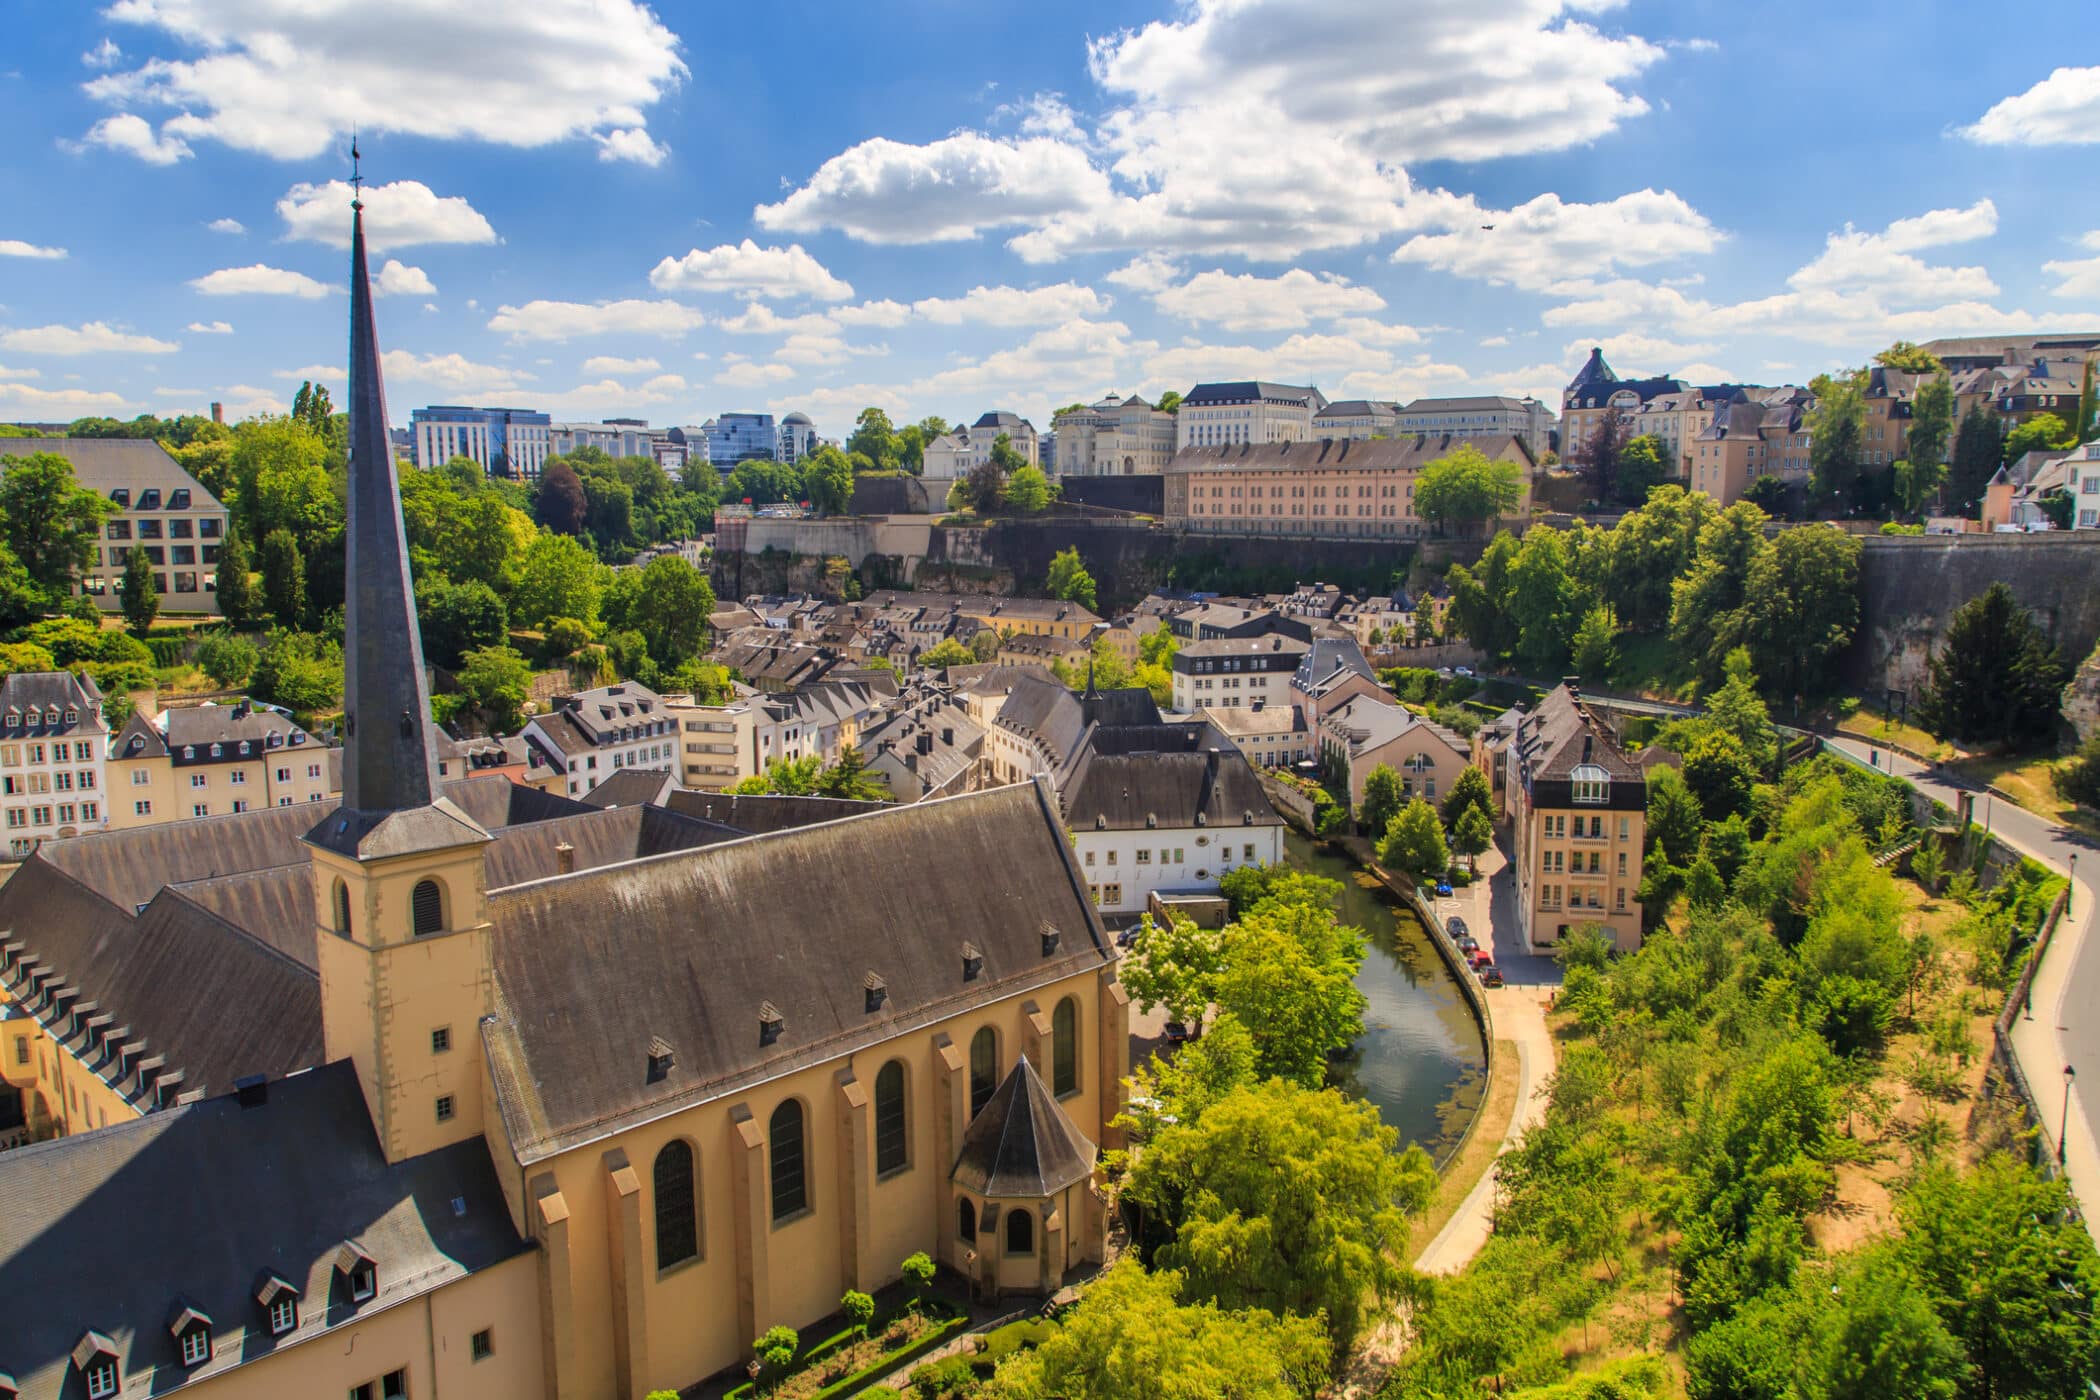 Skyline of Luxembourg City, with the St Jean du Grund church in the foreground.